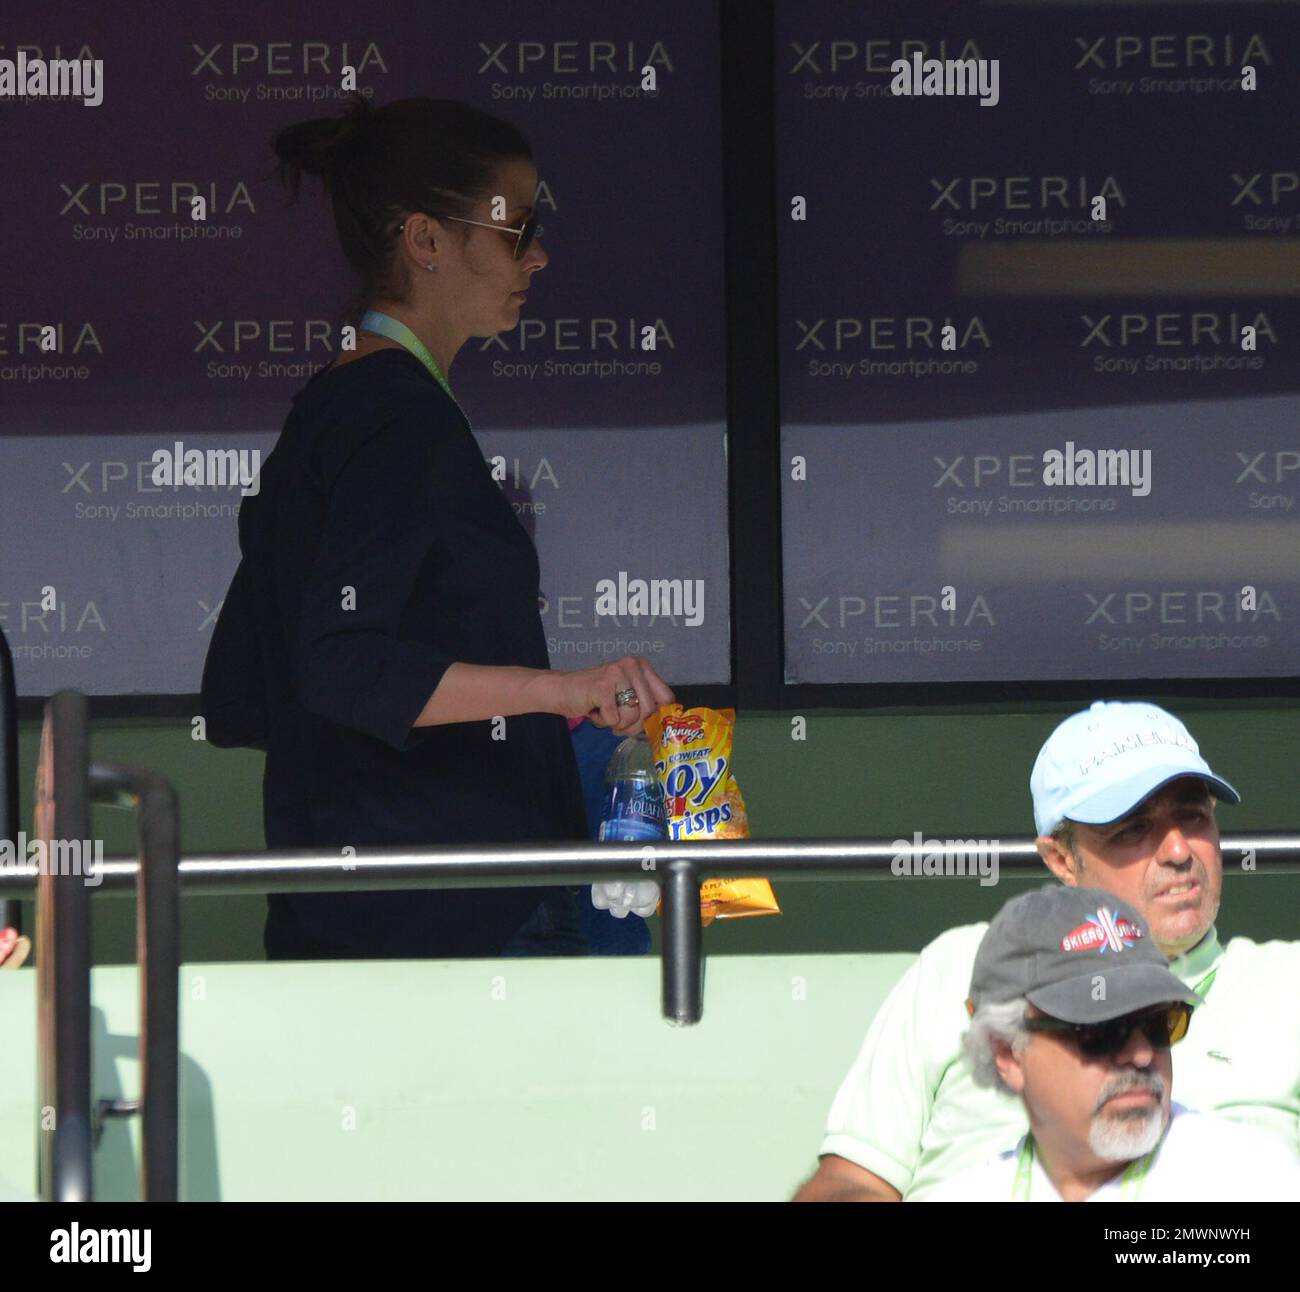 KEY BISCAYNE, FL - MARCH 24: Quarterback Tom Brady baby mama and Coyote Ugly Actress Bridget Moynahan and son Jack Brady day 7 at the Sony Open at Crandon Park Tennis Center. Kathryn Bridget Moynahan (born April 28, 1970, known as Bridget Moynahan, is an American model and actress on March 24, 2013 in Key Biscayne, Florida. People: Bridget Moynahan Jack Brady Credit: Storms Media Group/Alamy Live News Stock Photo